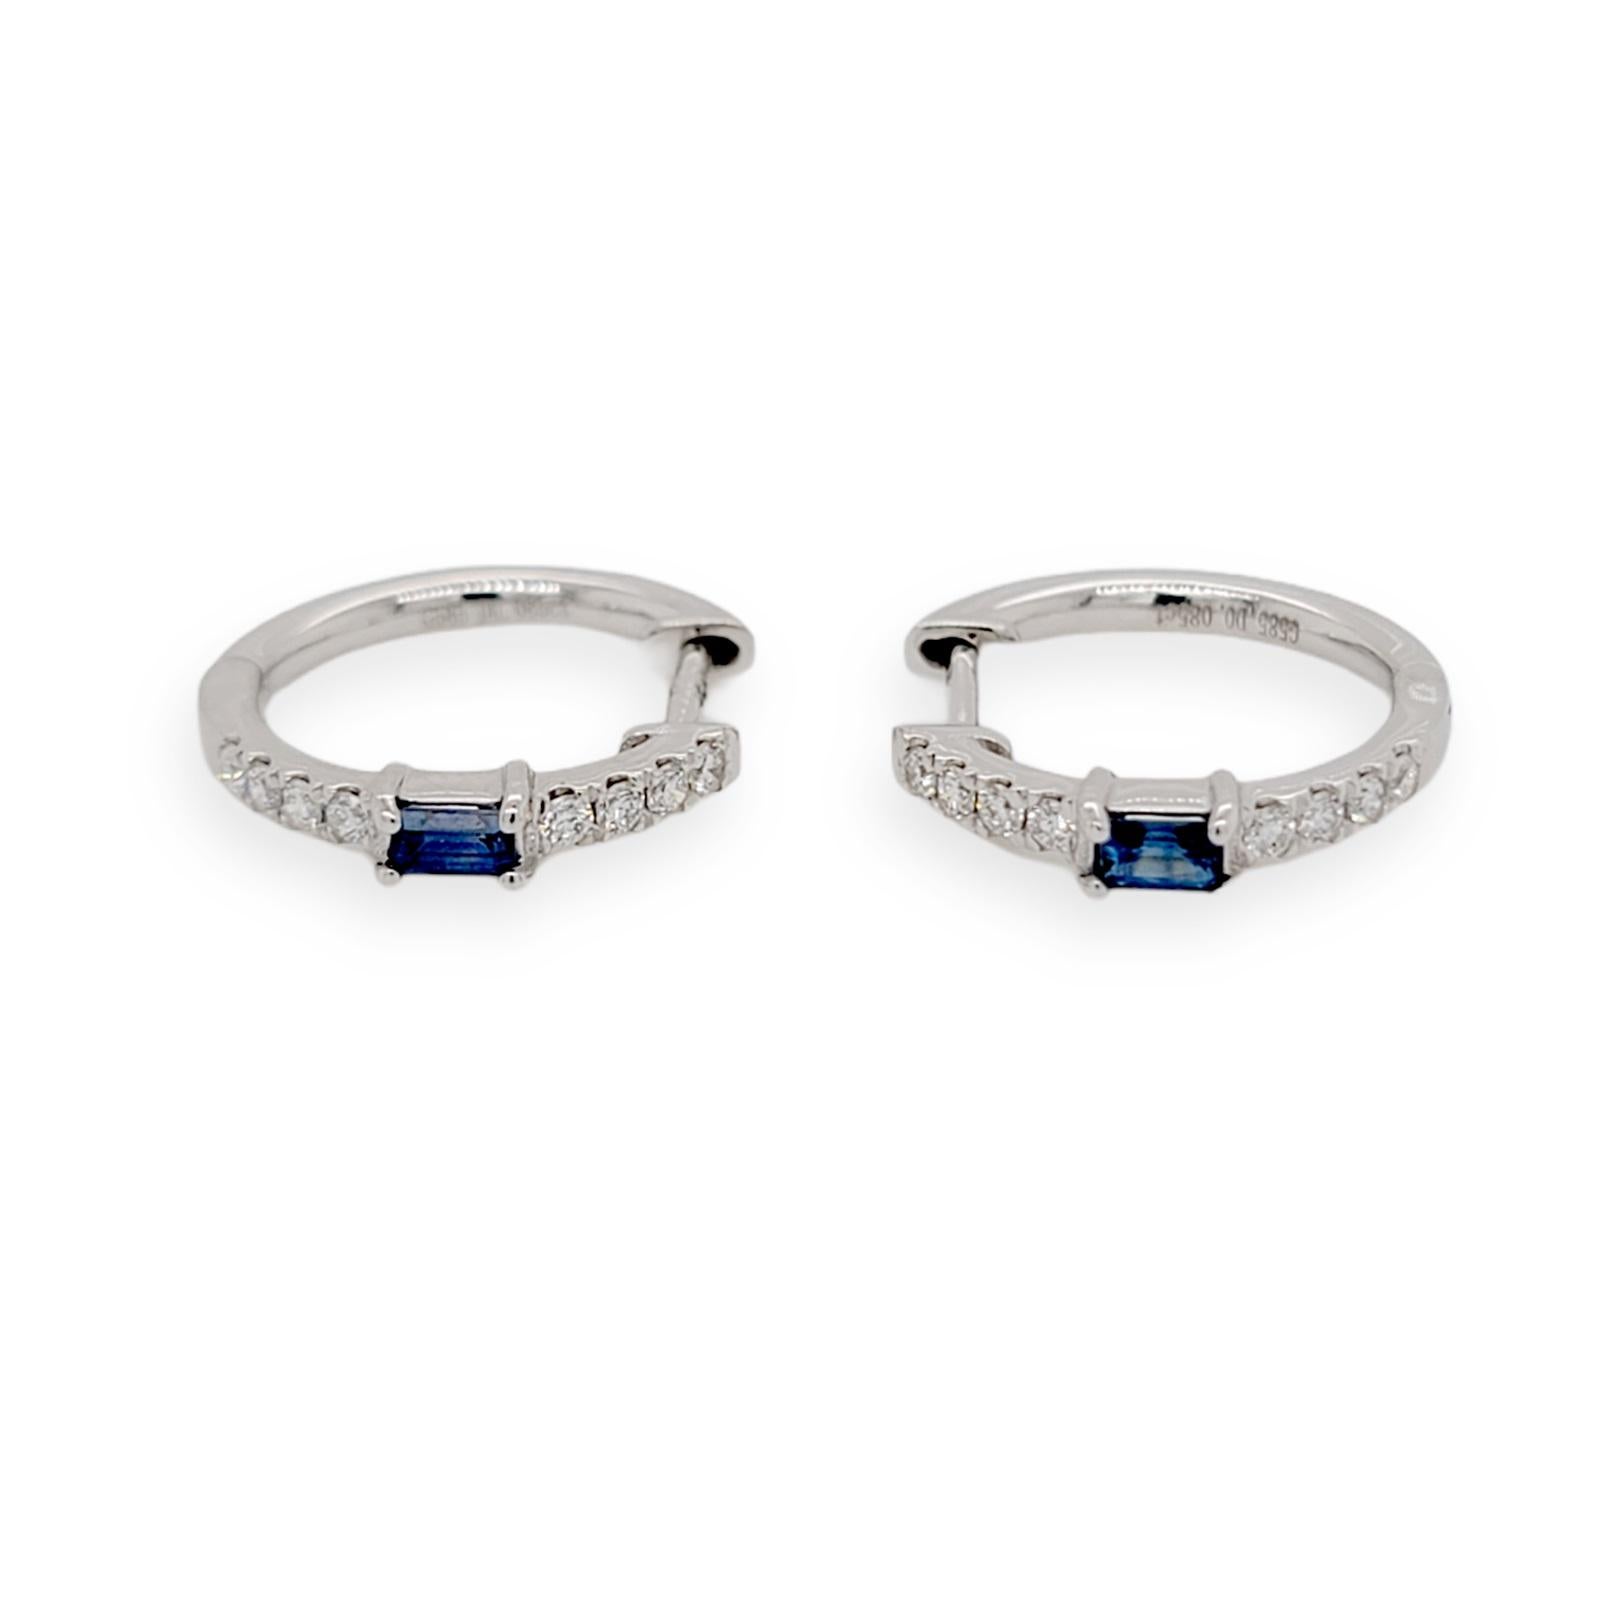 100% Authentic, 100% Customer Satisfaction

Height: 14 mm

Width: 2.5 mm

Metal:14K White Gold

Hallmarks: 14K

Total Weight: 2.1 Grams

Stone Type: 0.47 CT Natural Blue Sapphire & 0.17 CT Diamonds G SI1

Condition: New

Estimated Price: